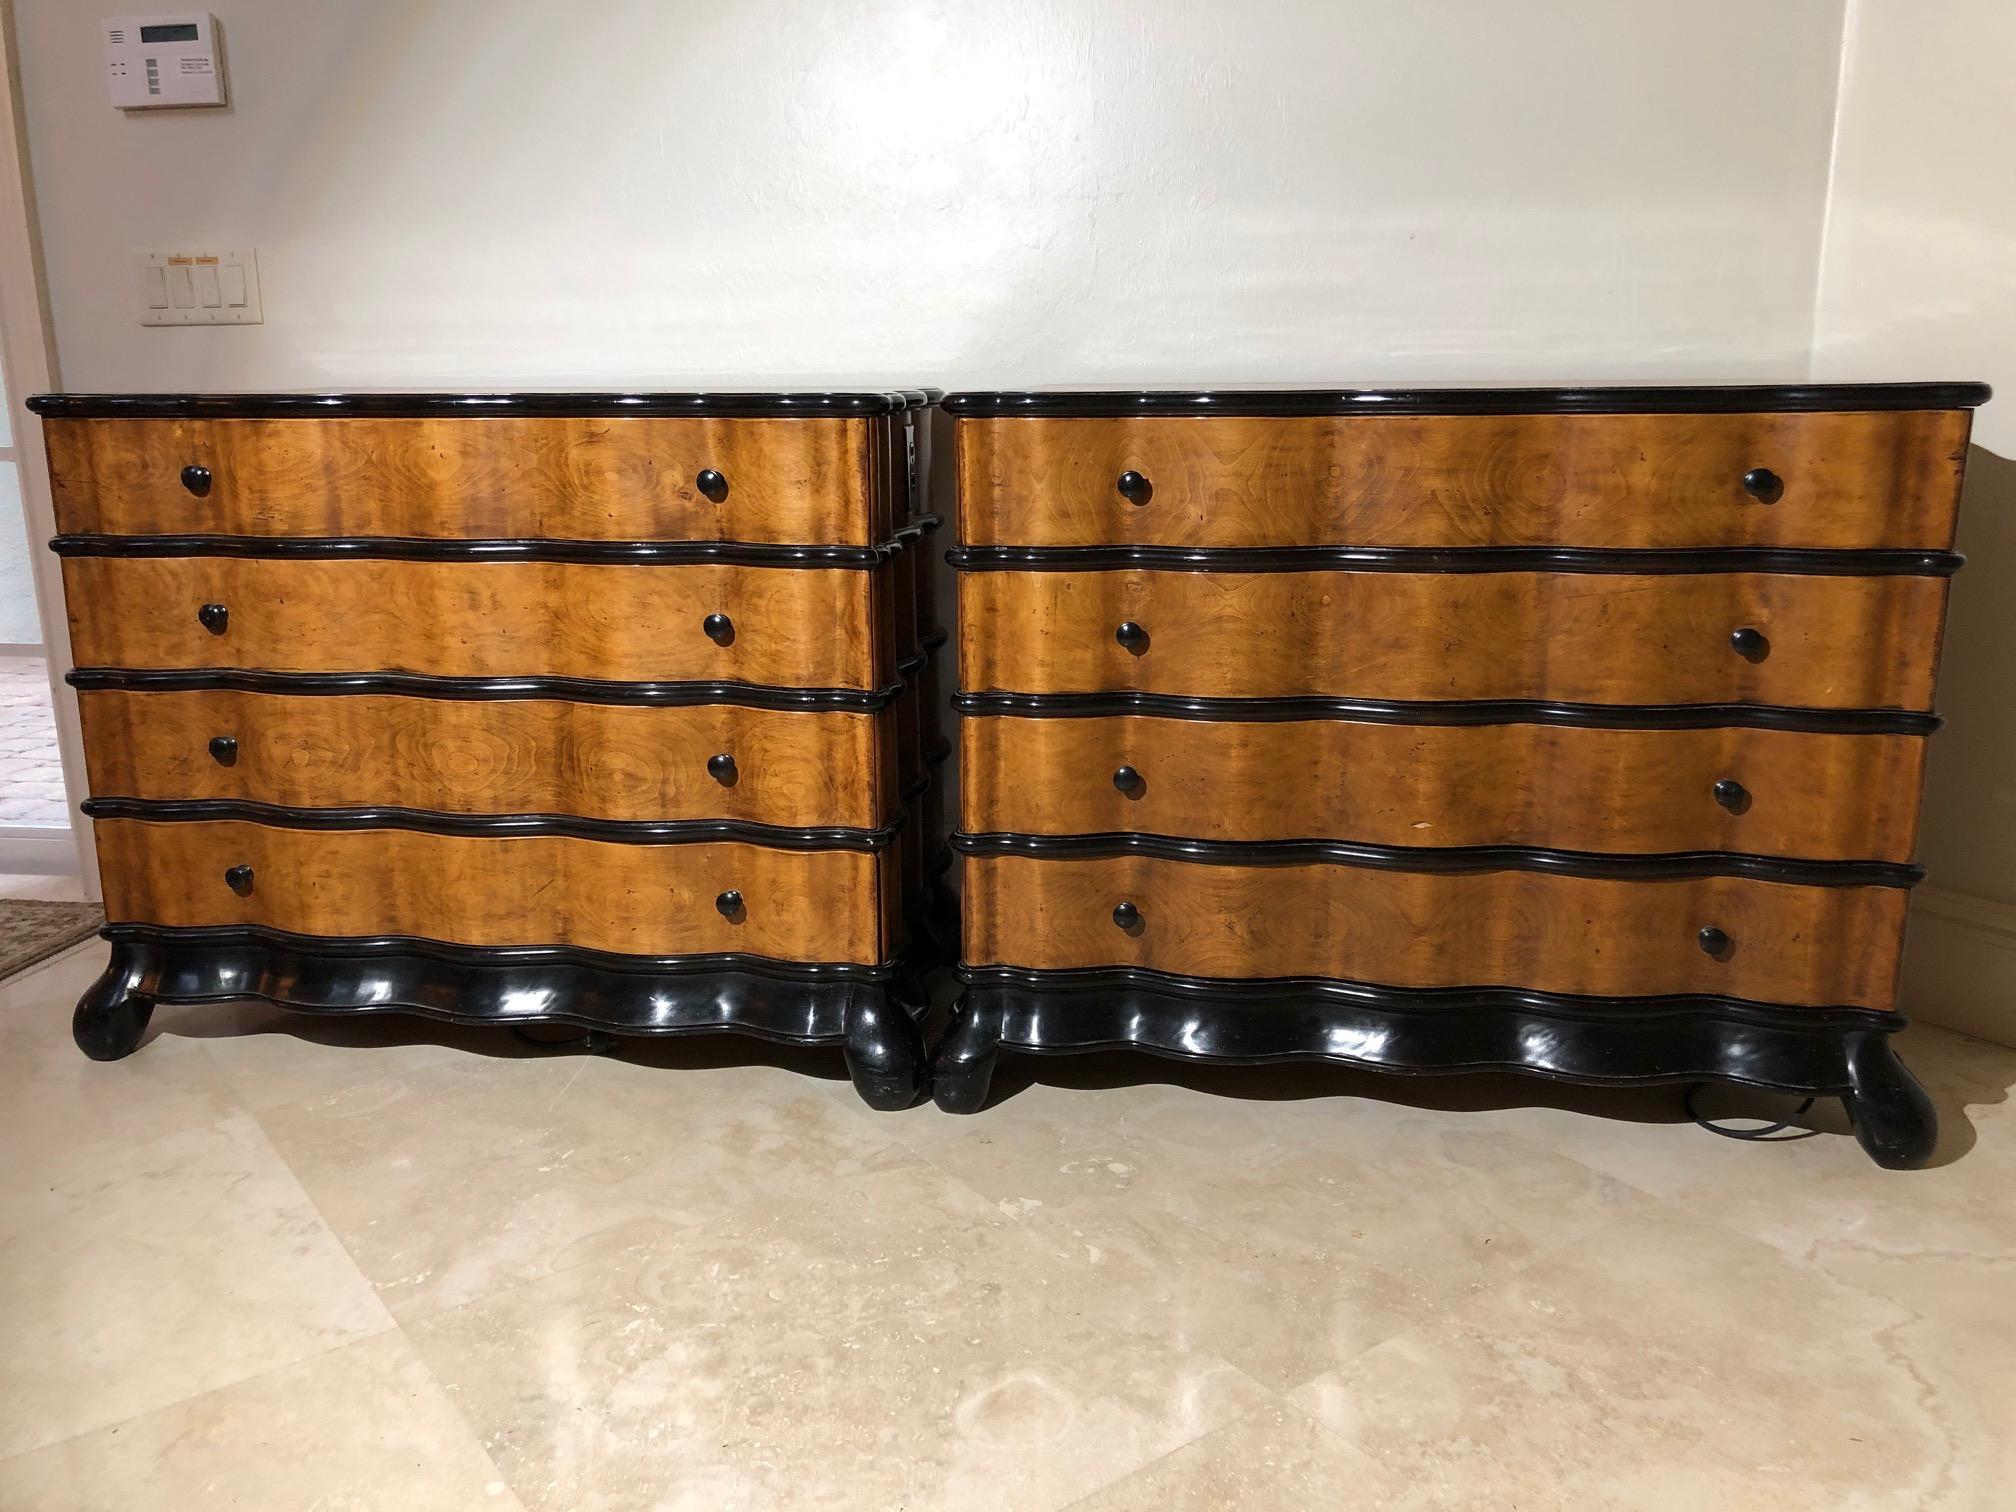 This pair of gorgeous walnut and ebony colored trimmed commodes or
chests are sublimely luxurious with serpentine undulating fronts and four roomy drawers. A nice perk they have outlets for lamps. Originally custom made for the Bellagio Las